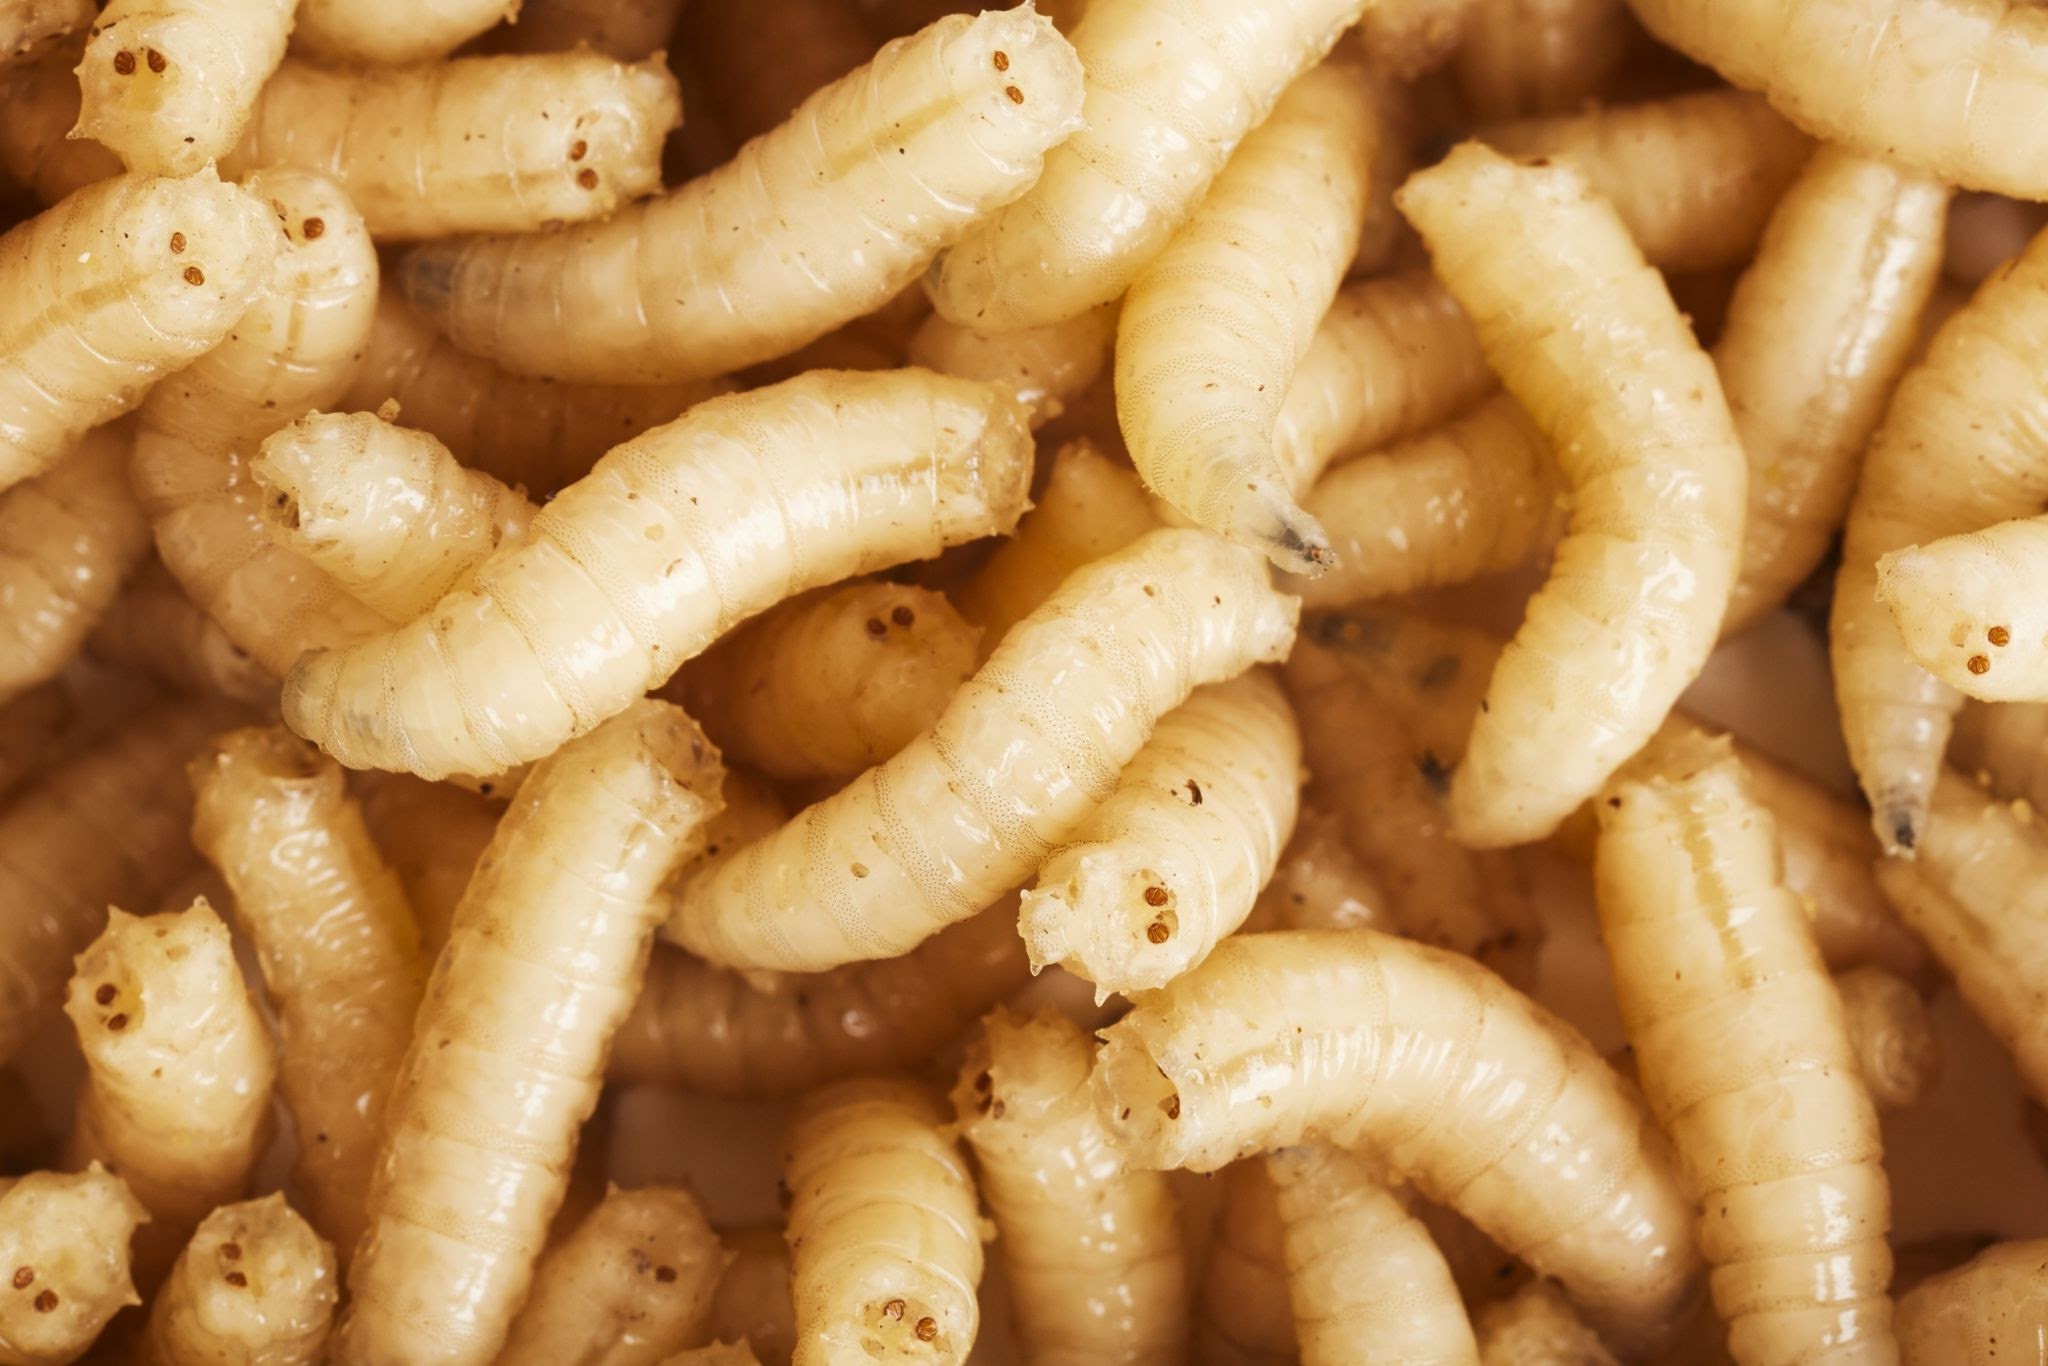 Where Do Maggots Come From & How To Get Rid Of Them